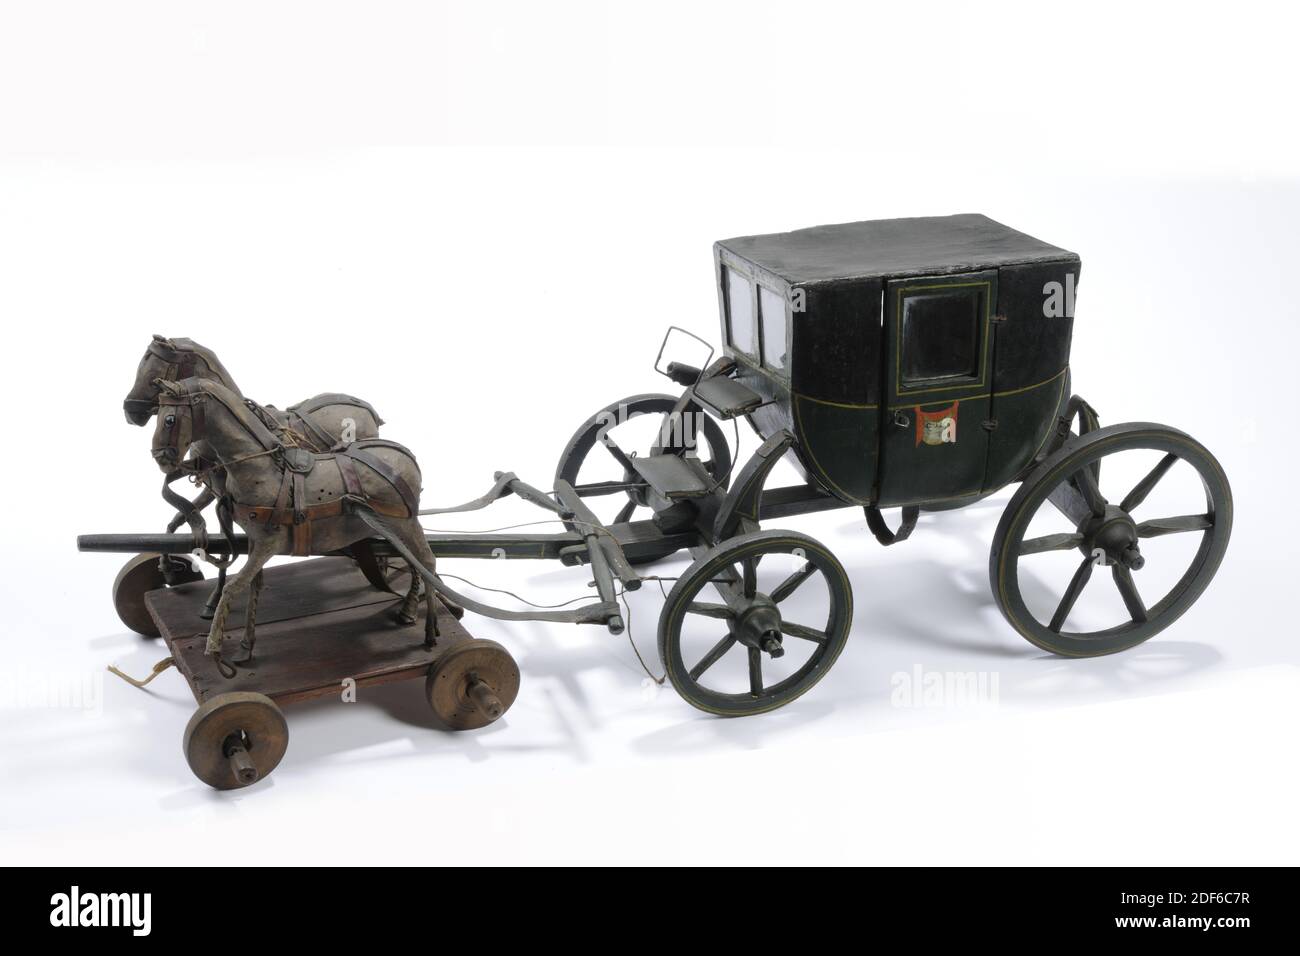 Anonymous, first half of the 19th century, glass, wood, rope, leather, painted, Toy carriage with two horses, a pair of horses, of painted wood. The black and green painted carriage contains two four-wheel axles, with the rear wheels being larger than the front wheels. The coach has a covered hood for the passengers and a separate seat for the coachman. Both doors of the carriage have C.D.F .. under the glass windows. The carriage has two horses, covered with leather and standing on a plateau with four small wheels. The horses' reins are made of rope. The horses' tails are broken off, General Stock Photo